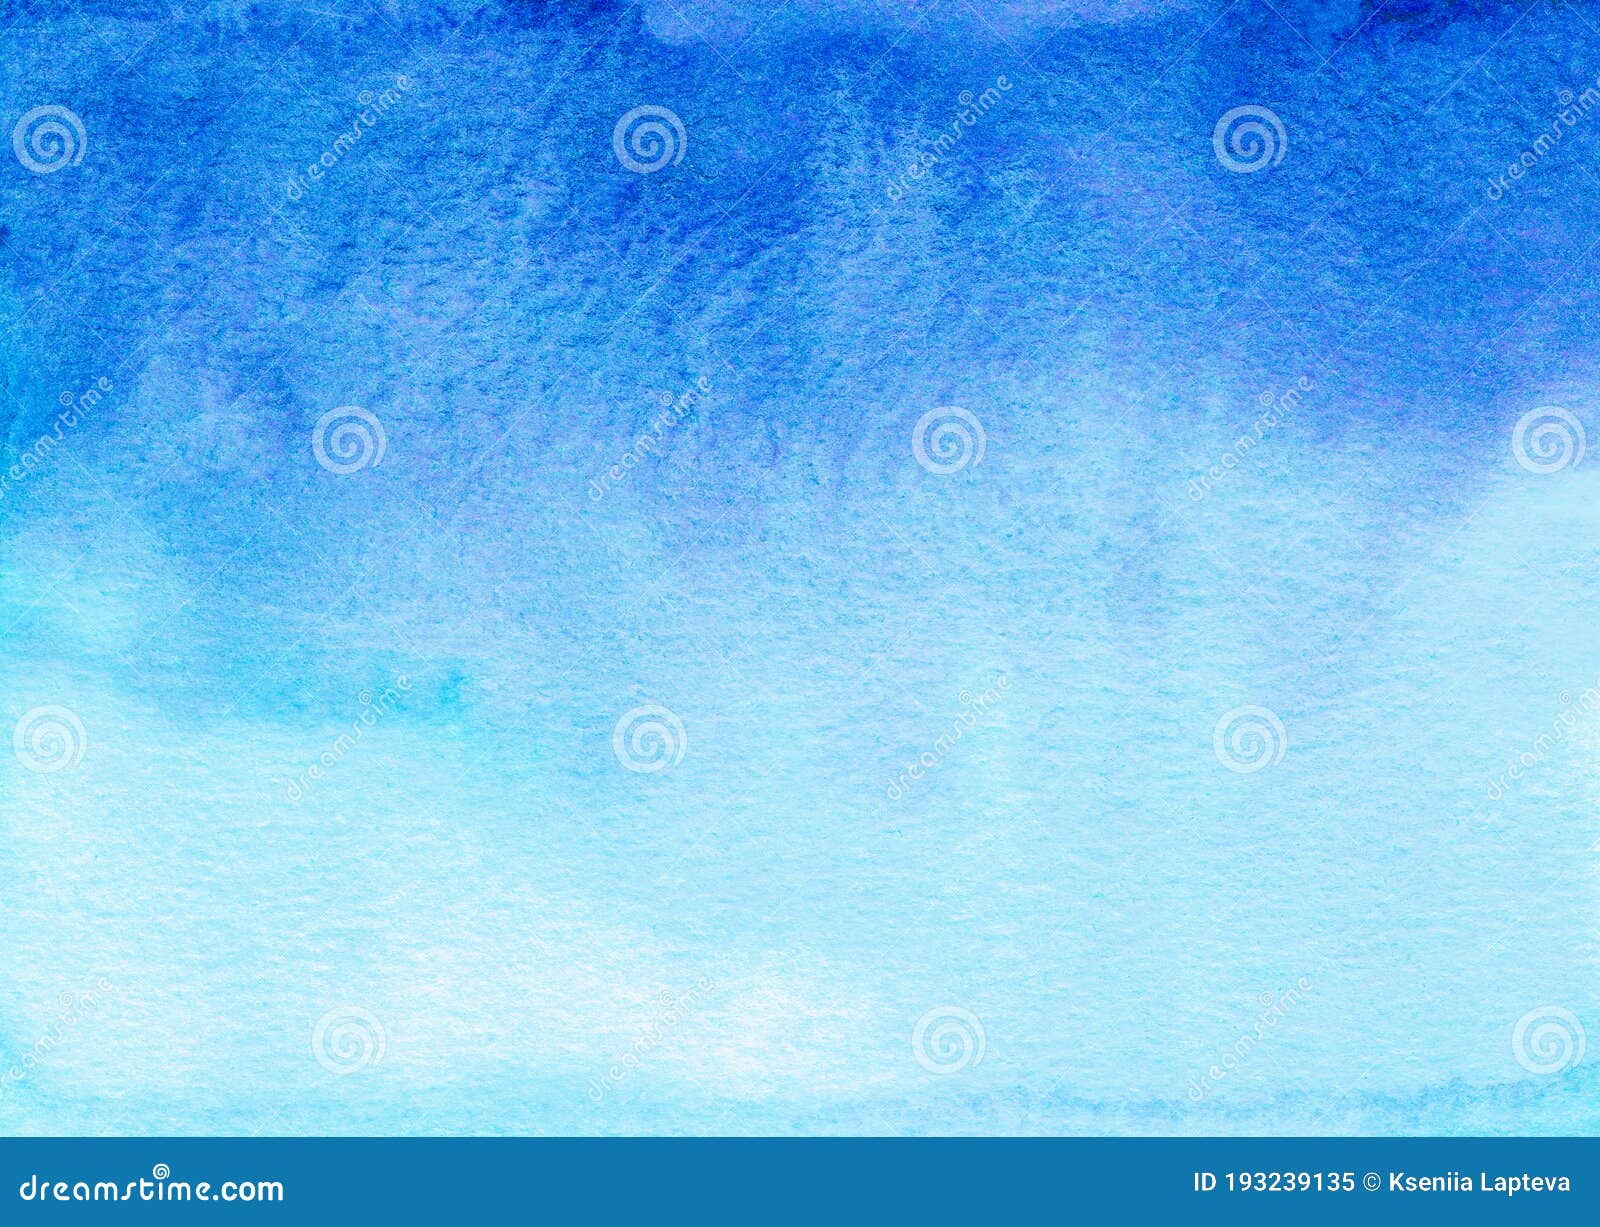 Watercolor Deep Blue and White Gradient Background. Watercolour Cerulean  Ombre Backdrop Texture Stock Image - Image of abstract, brush: 193239135